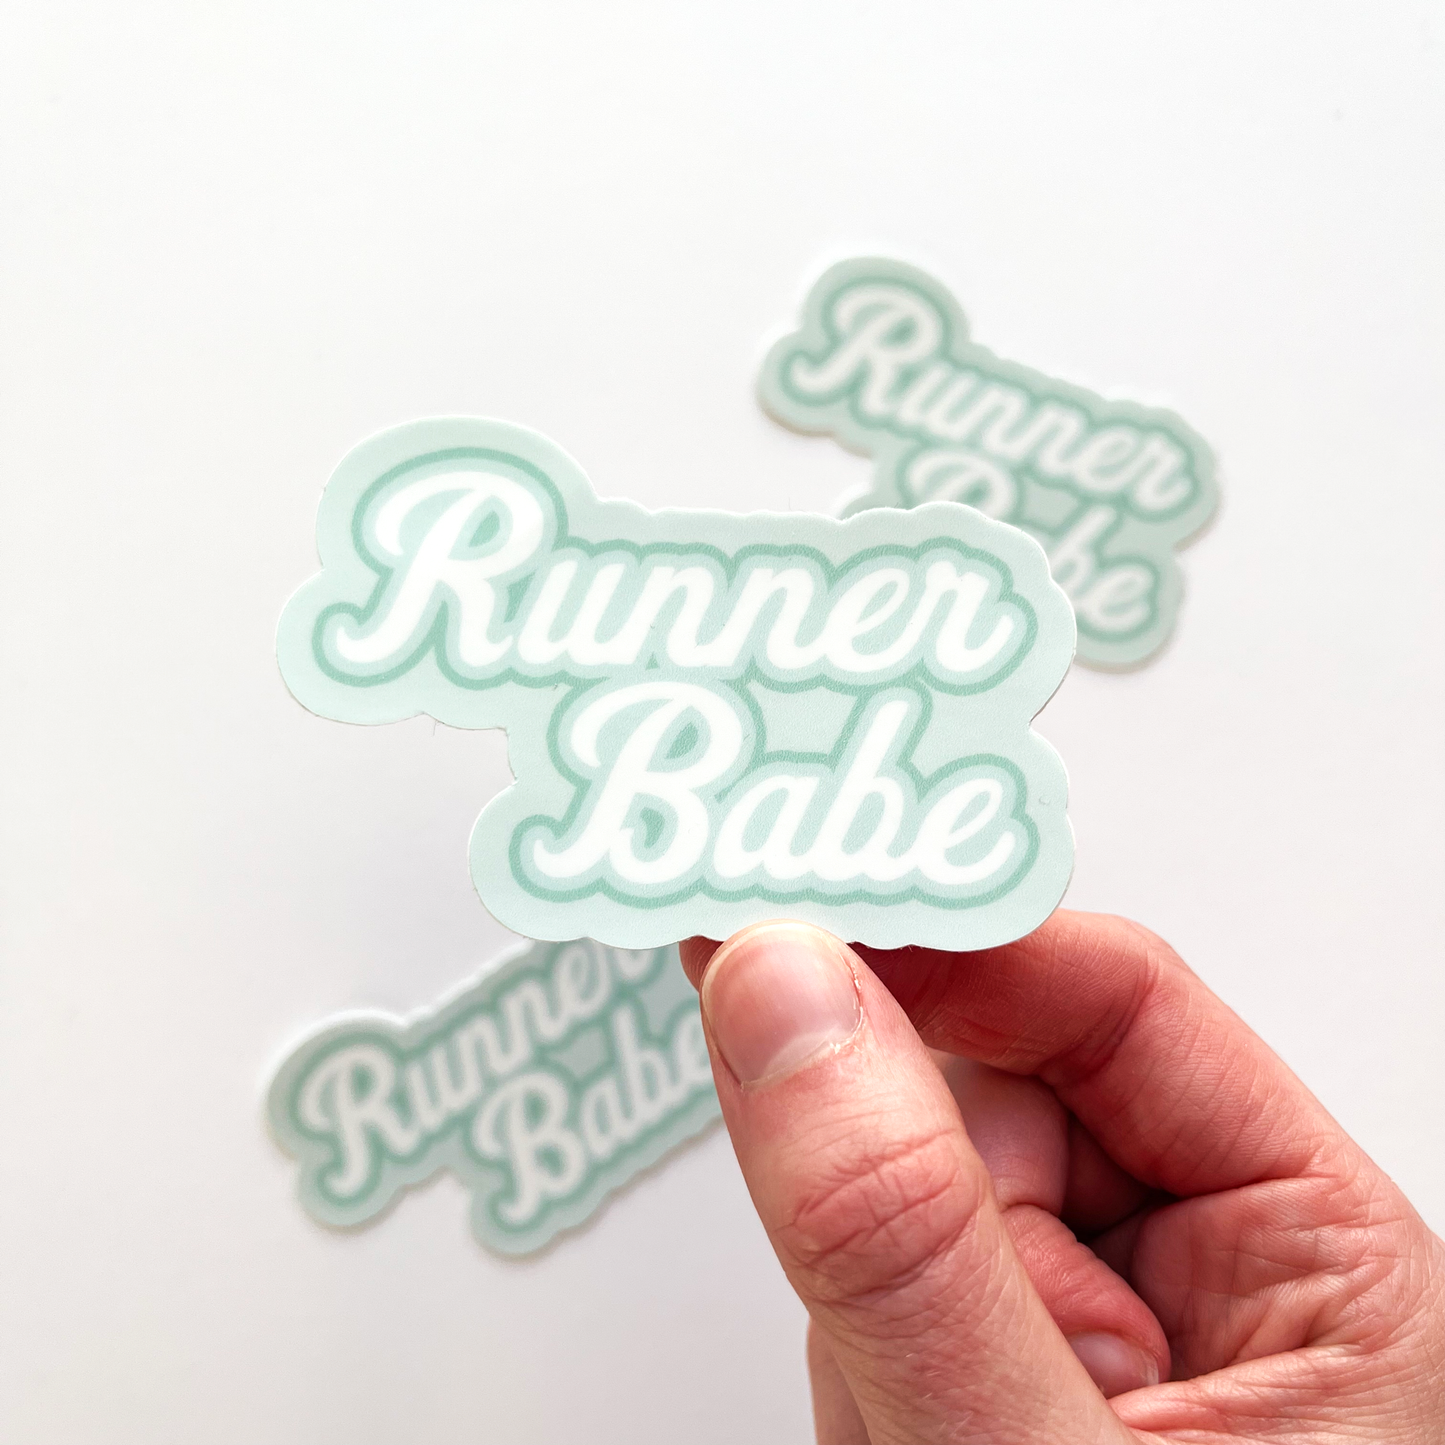 Runner babe sticker with white text and outlined in teal and blue